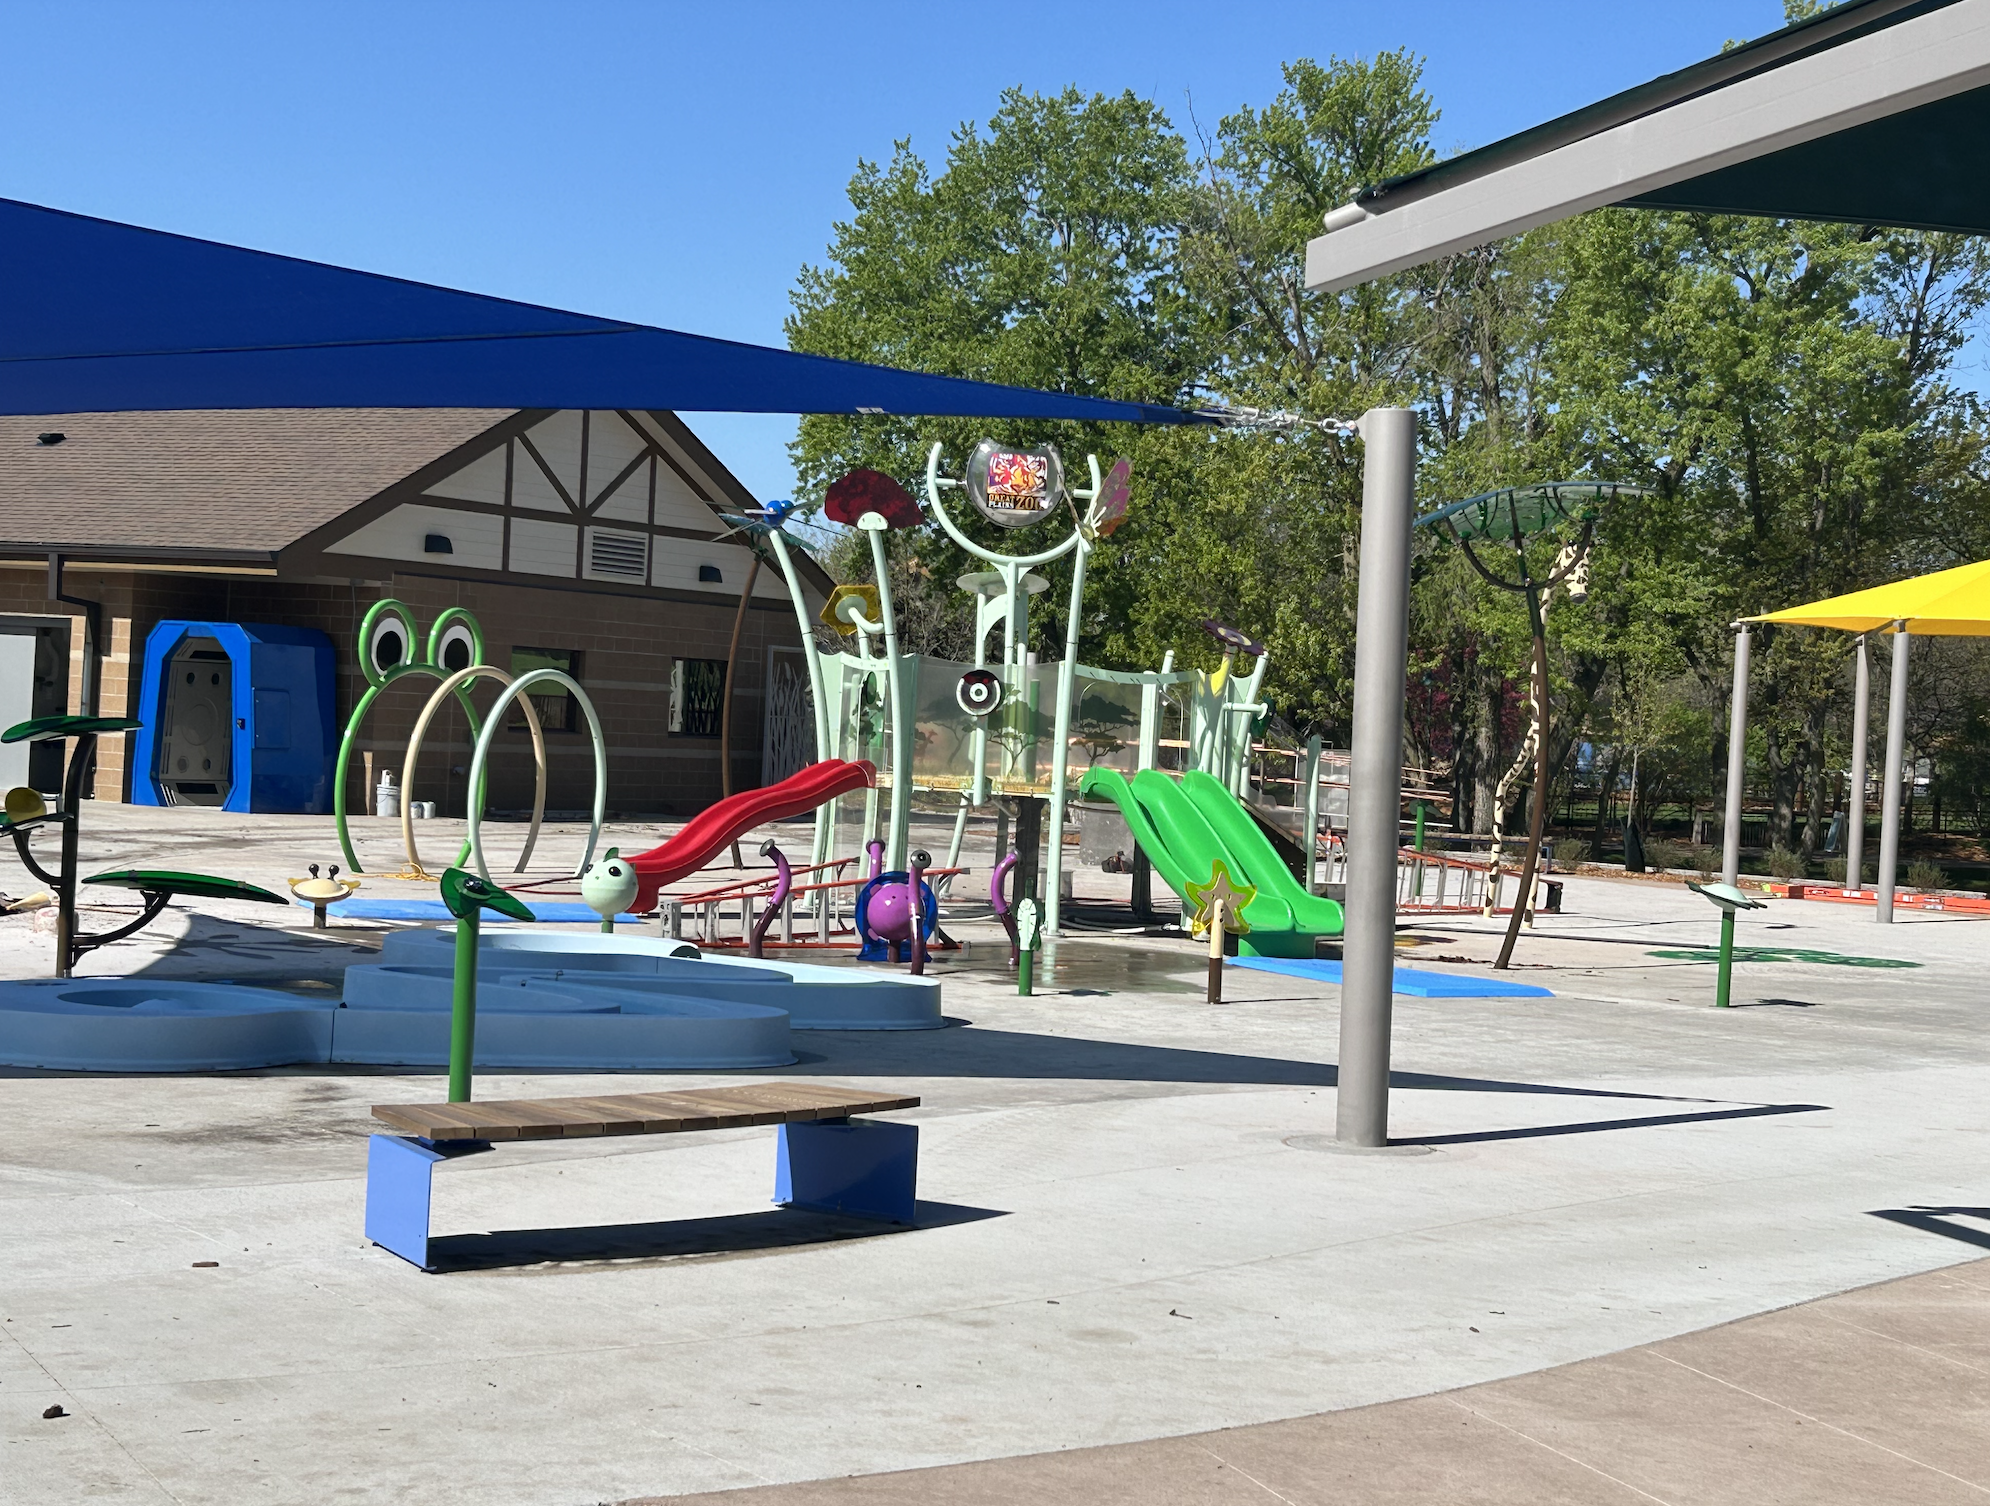 Get a look at the zoo's new splash pad